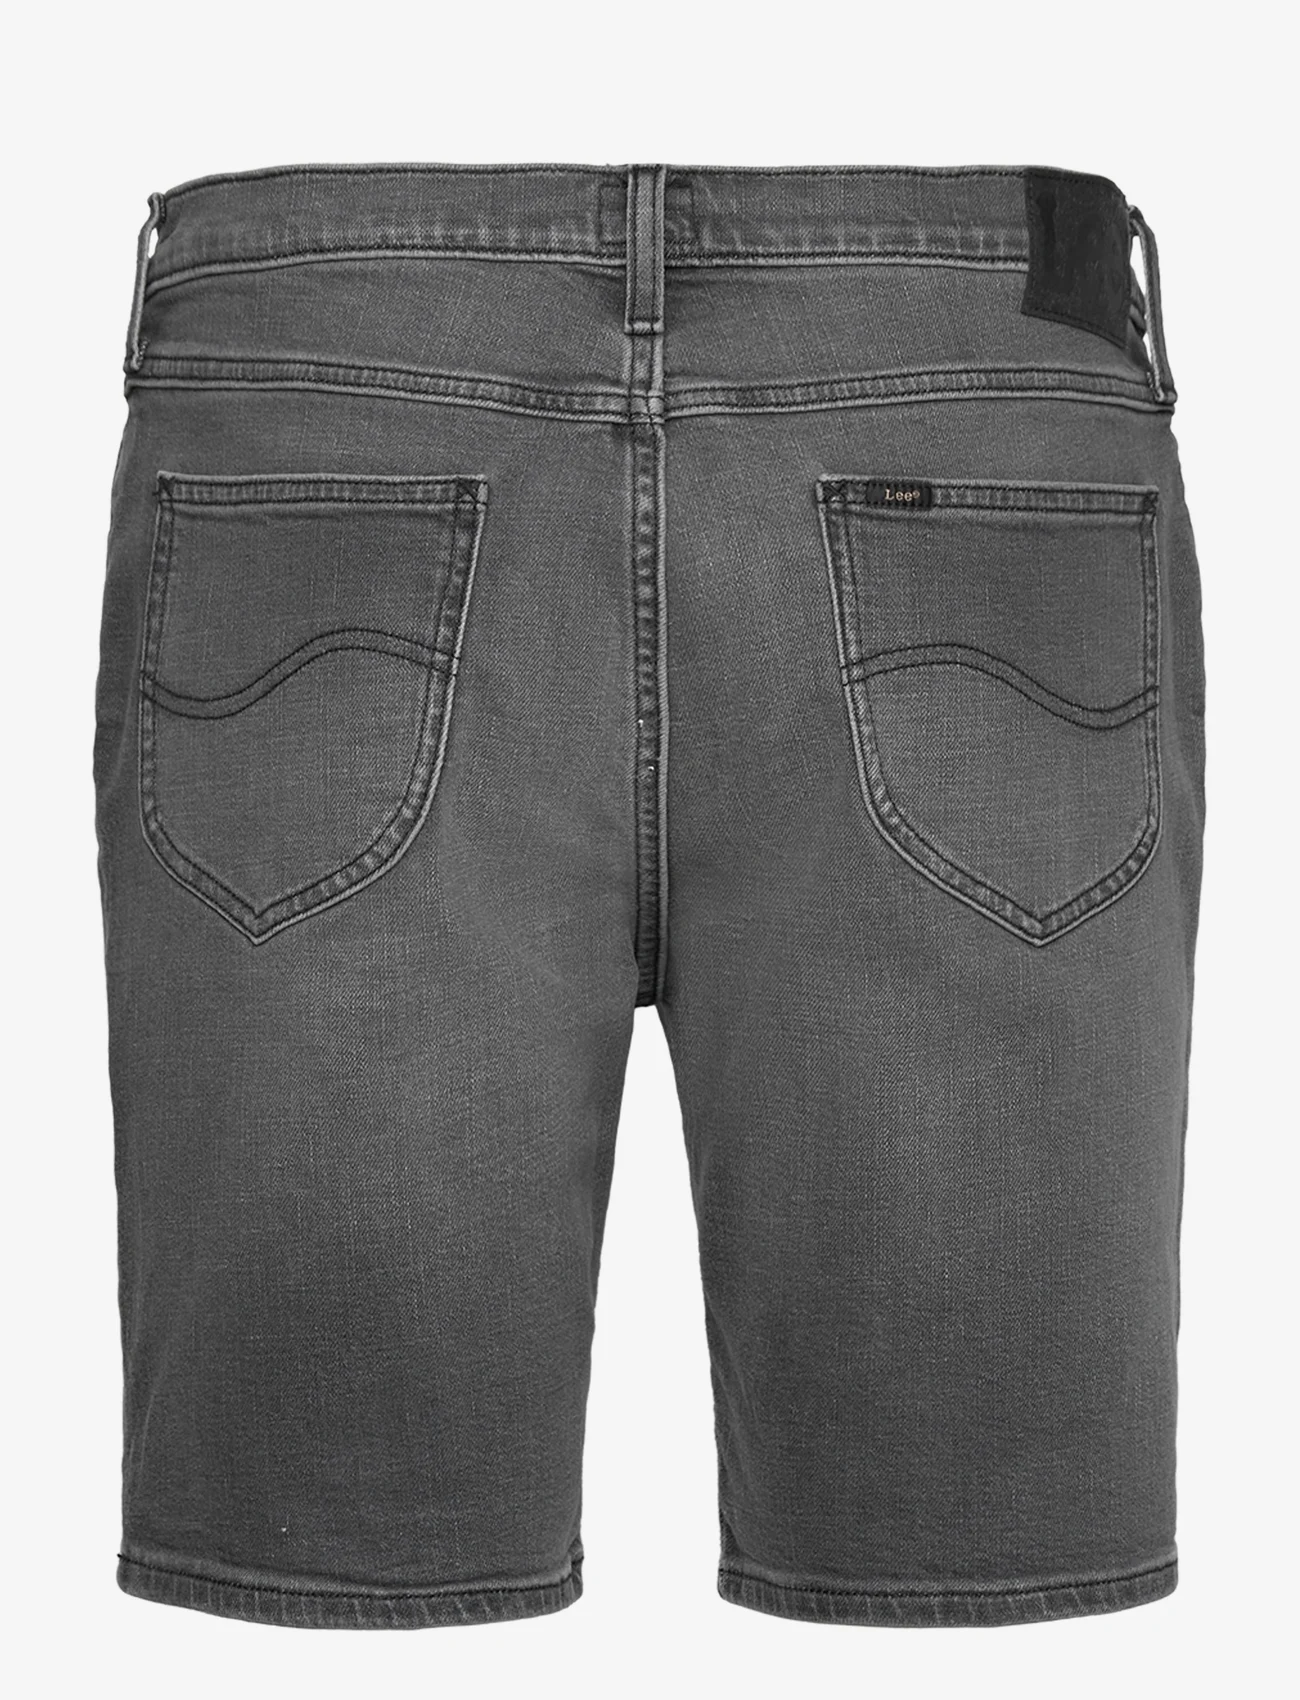 Lee Jeans - RIDER SHORT - jeansshorts - washed grey - 1